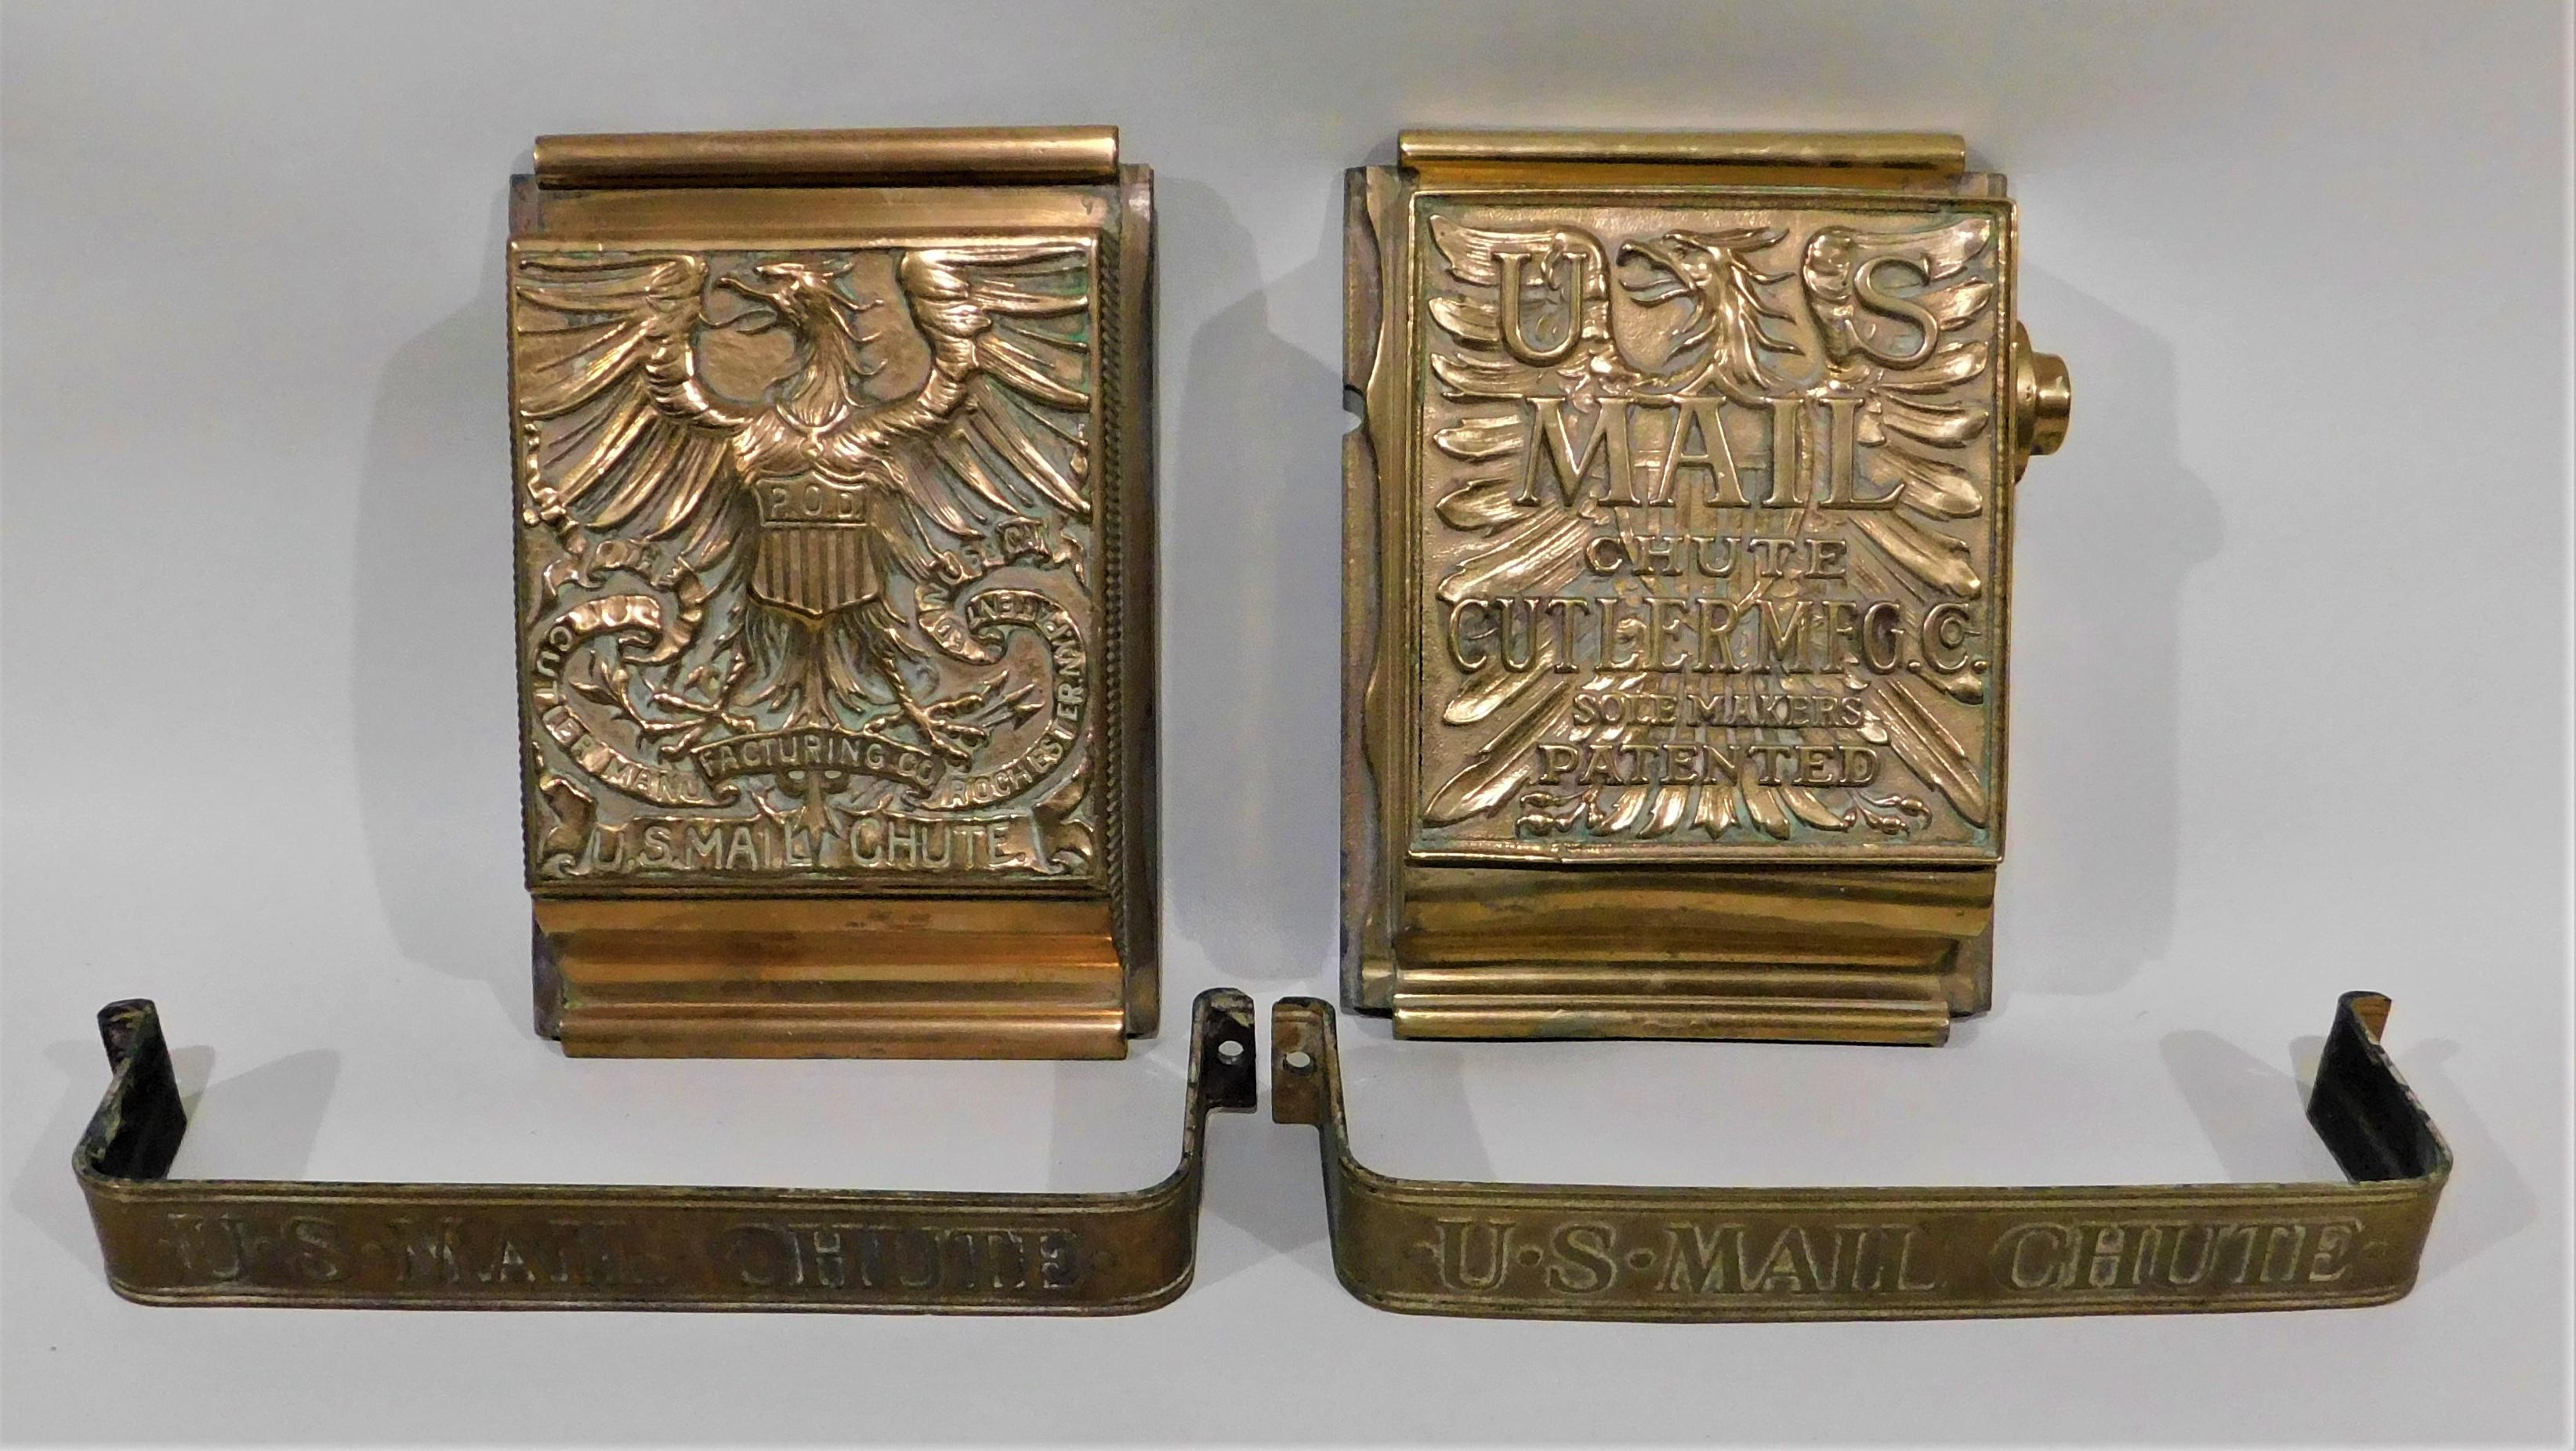 Pairs of antique American 19th century U.S. brass postal mail wall chutes with eagle designs and door pulls made by the Cutler Manufacturing Company. These came out of a bank from Williams Street in New York City's financial district. The door pulls